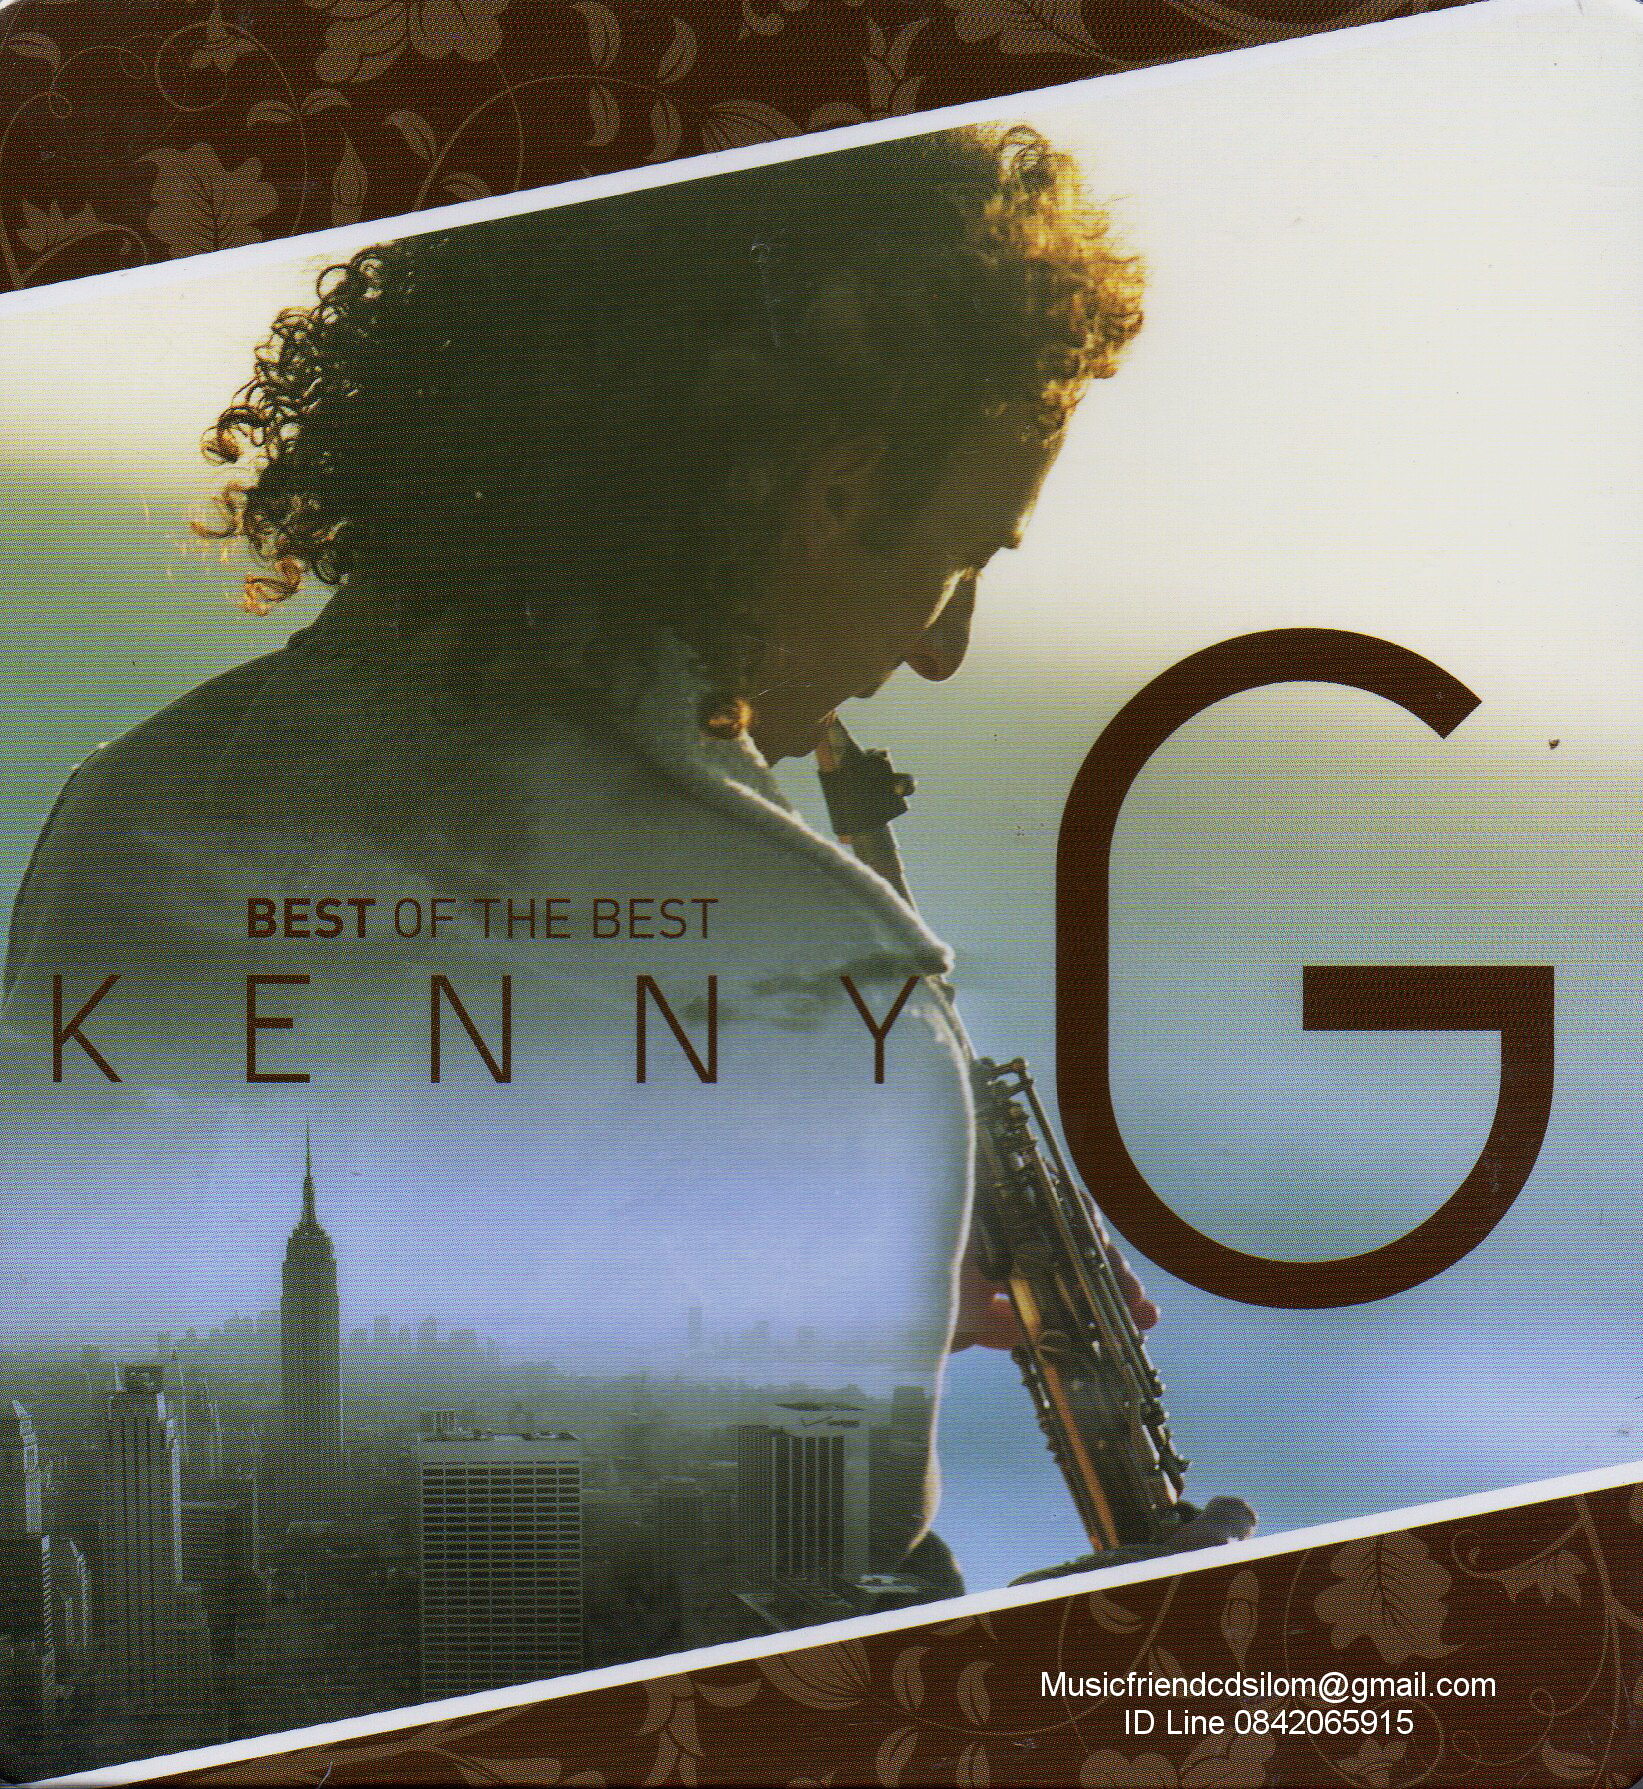 kenny g album with a gold g on disk image